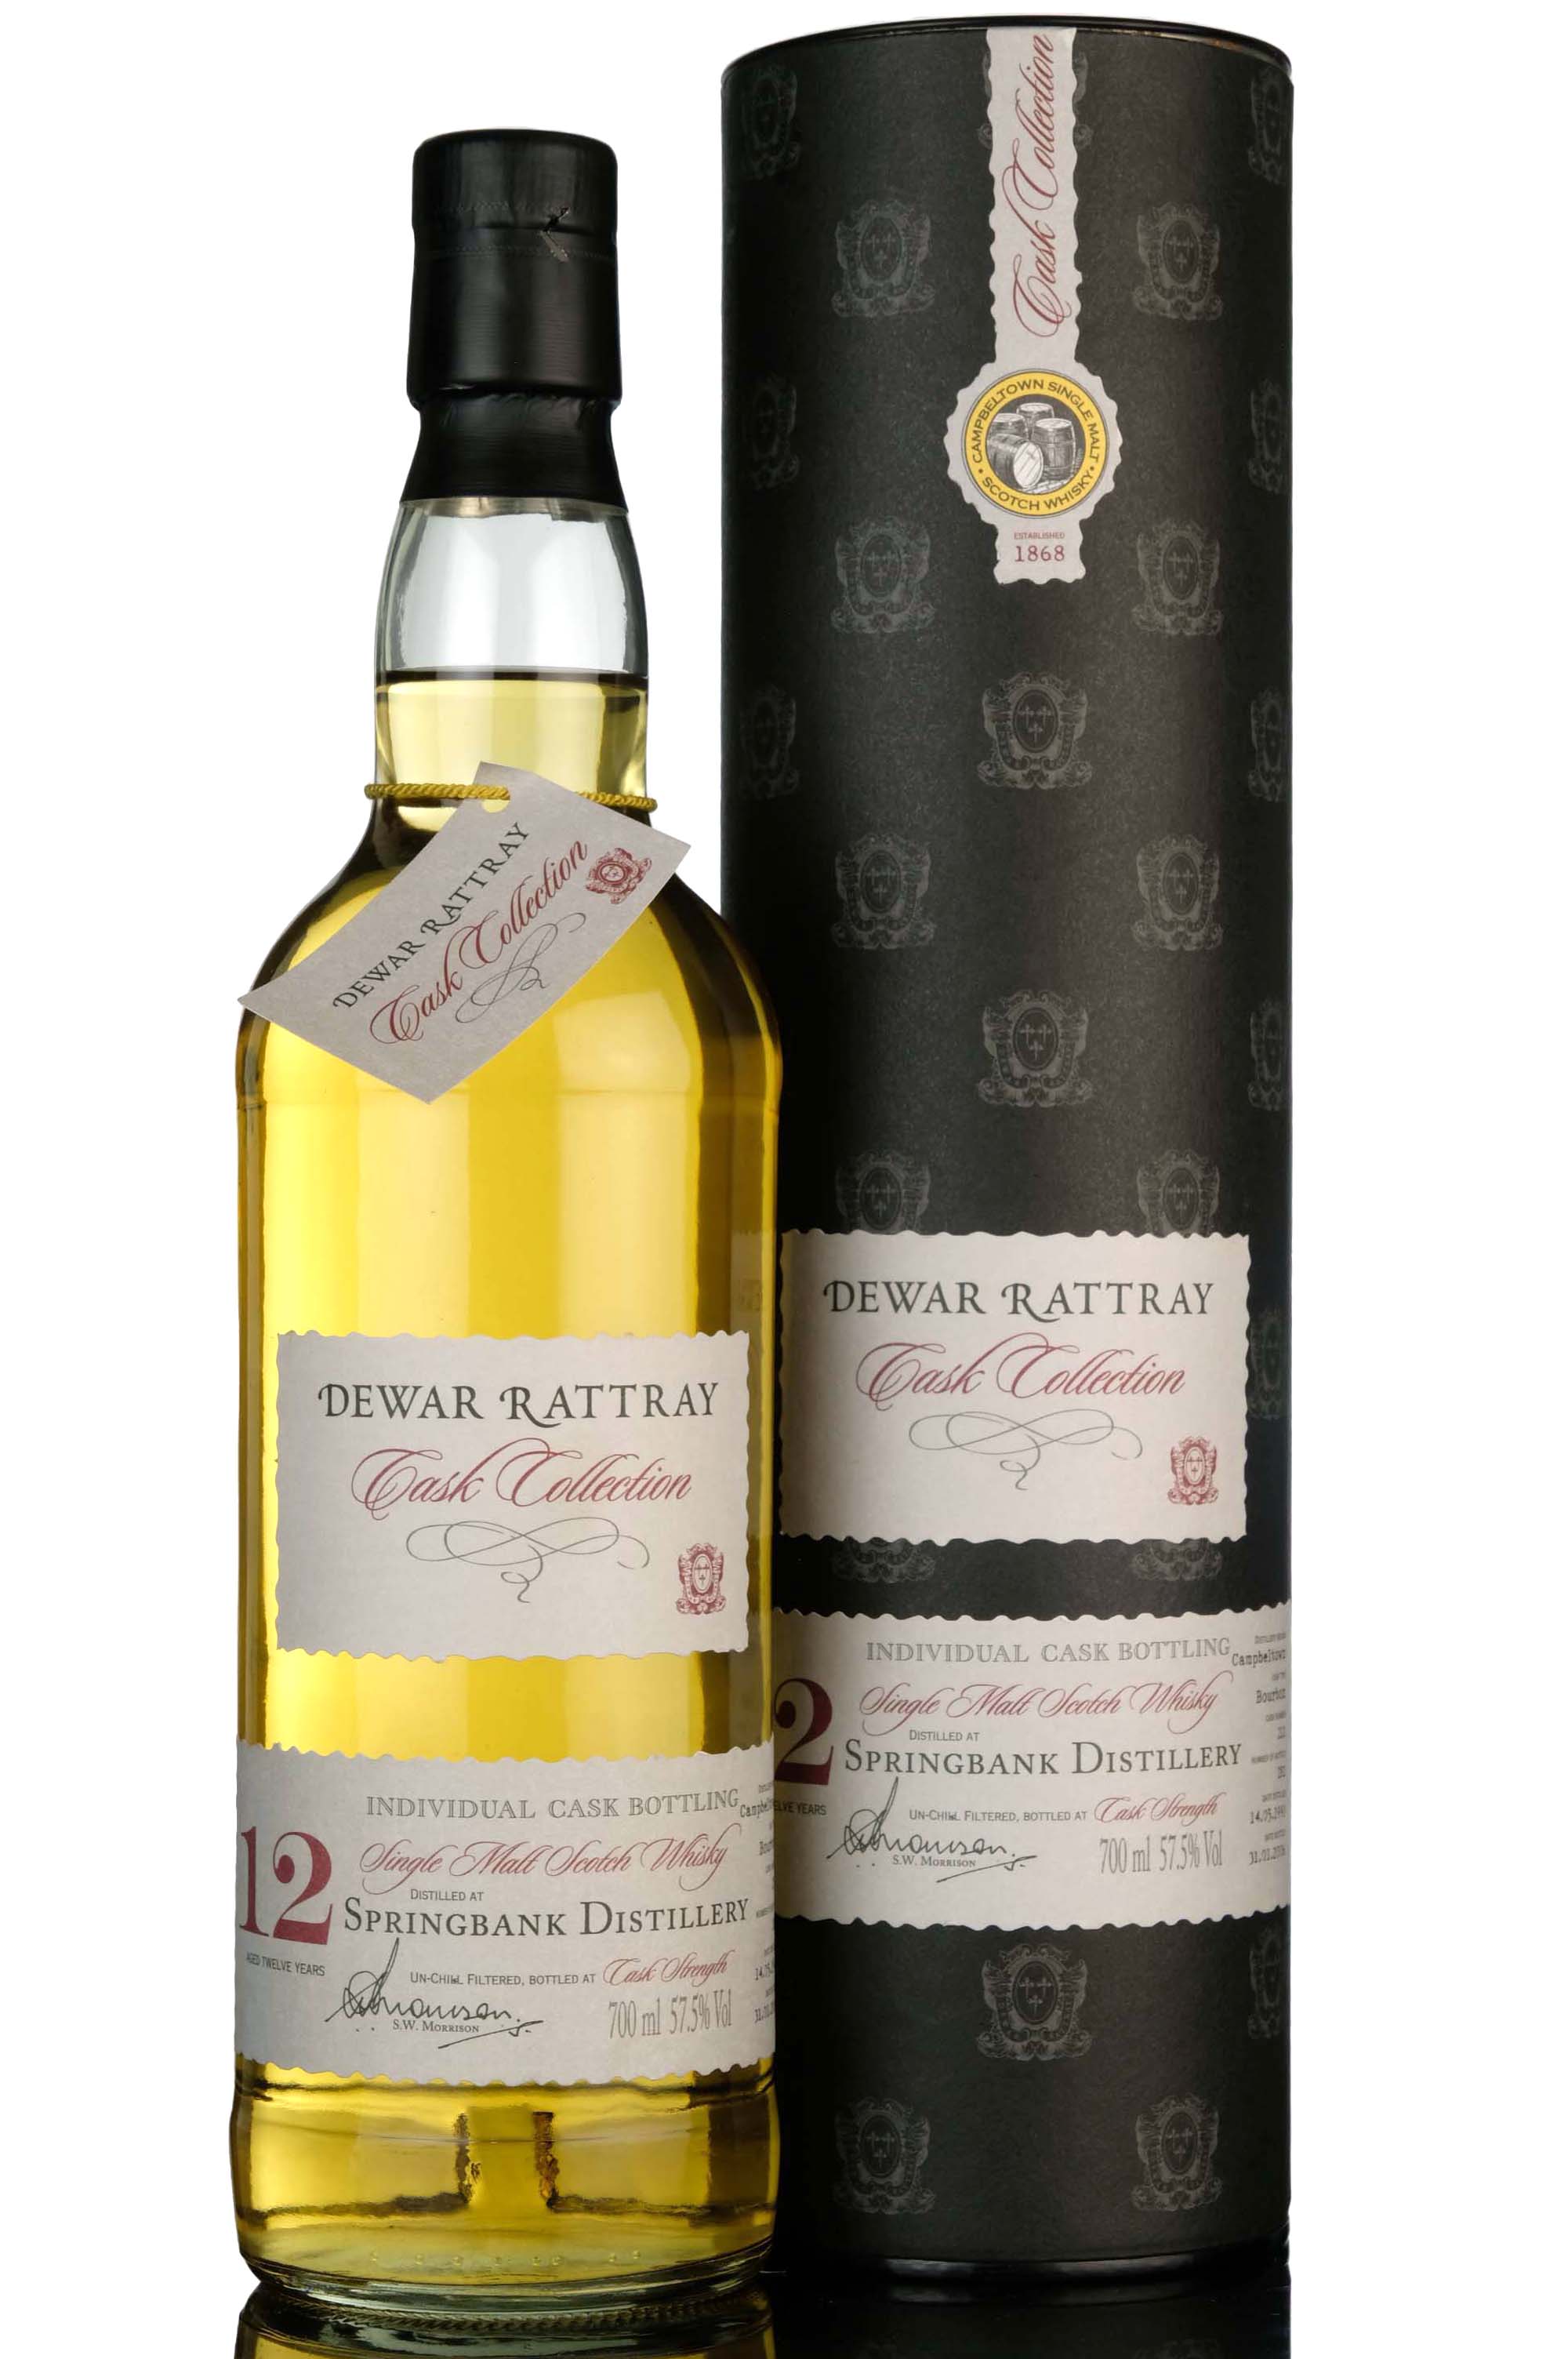 Springbank 1993-2006 - 12 Year Old - Dewar Rattray Cask Collection - Single Cask 212